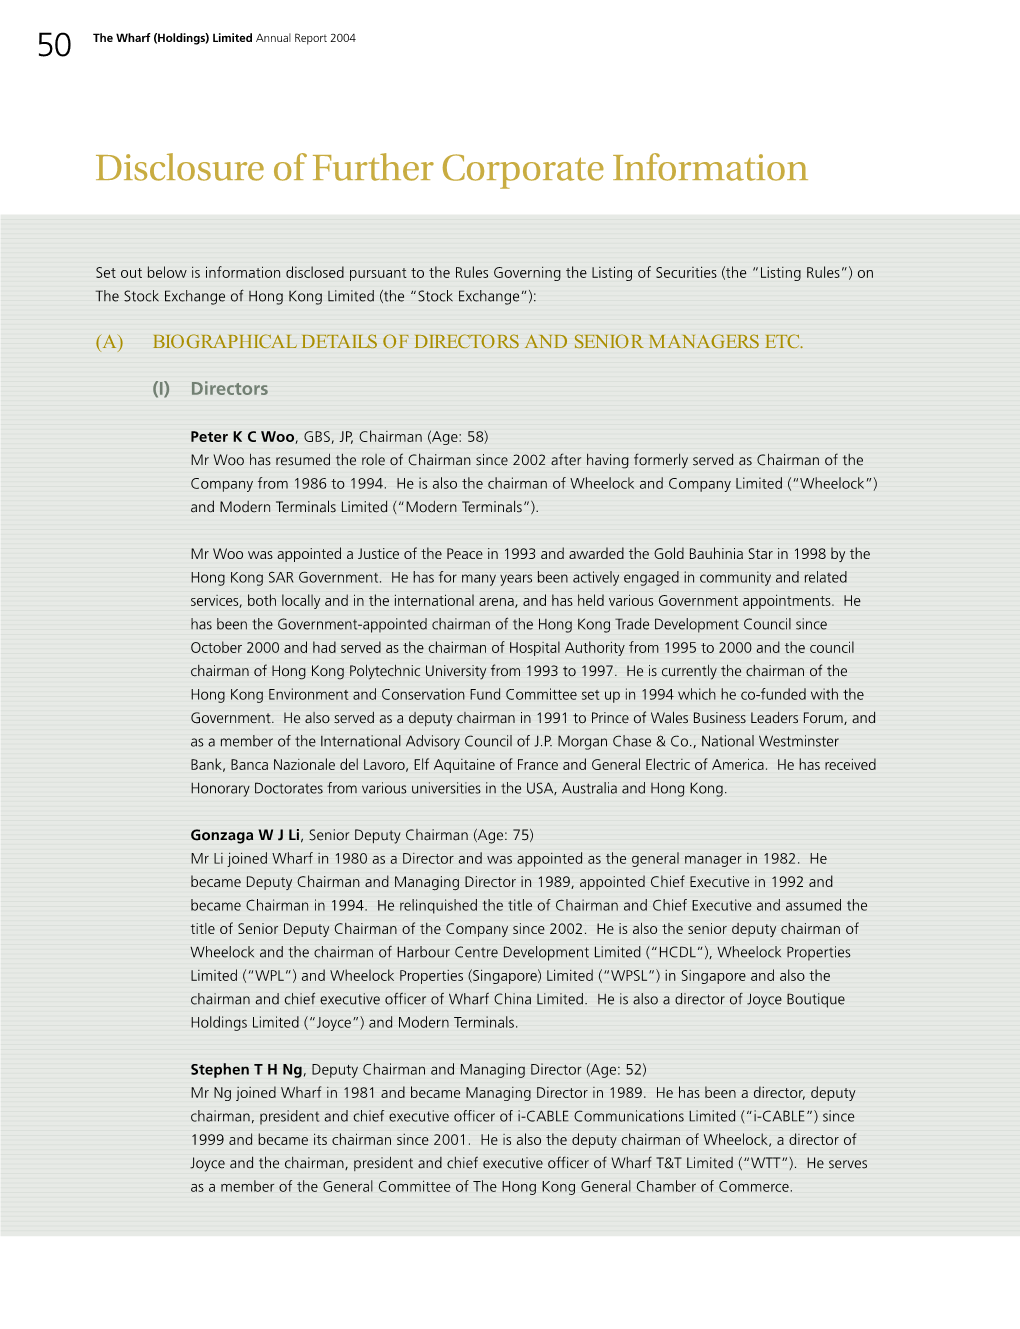 Disclosure of Further Corporate Information